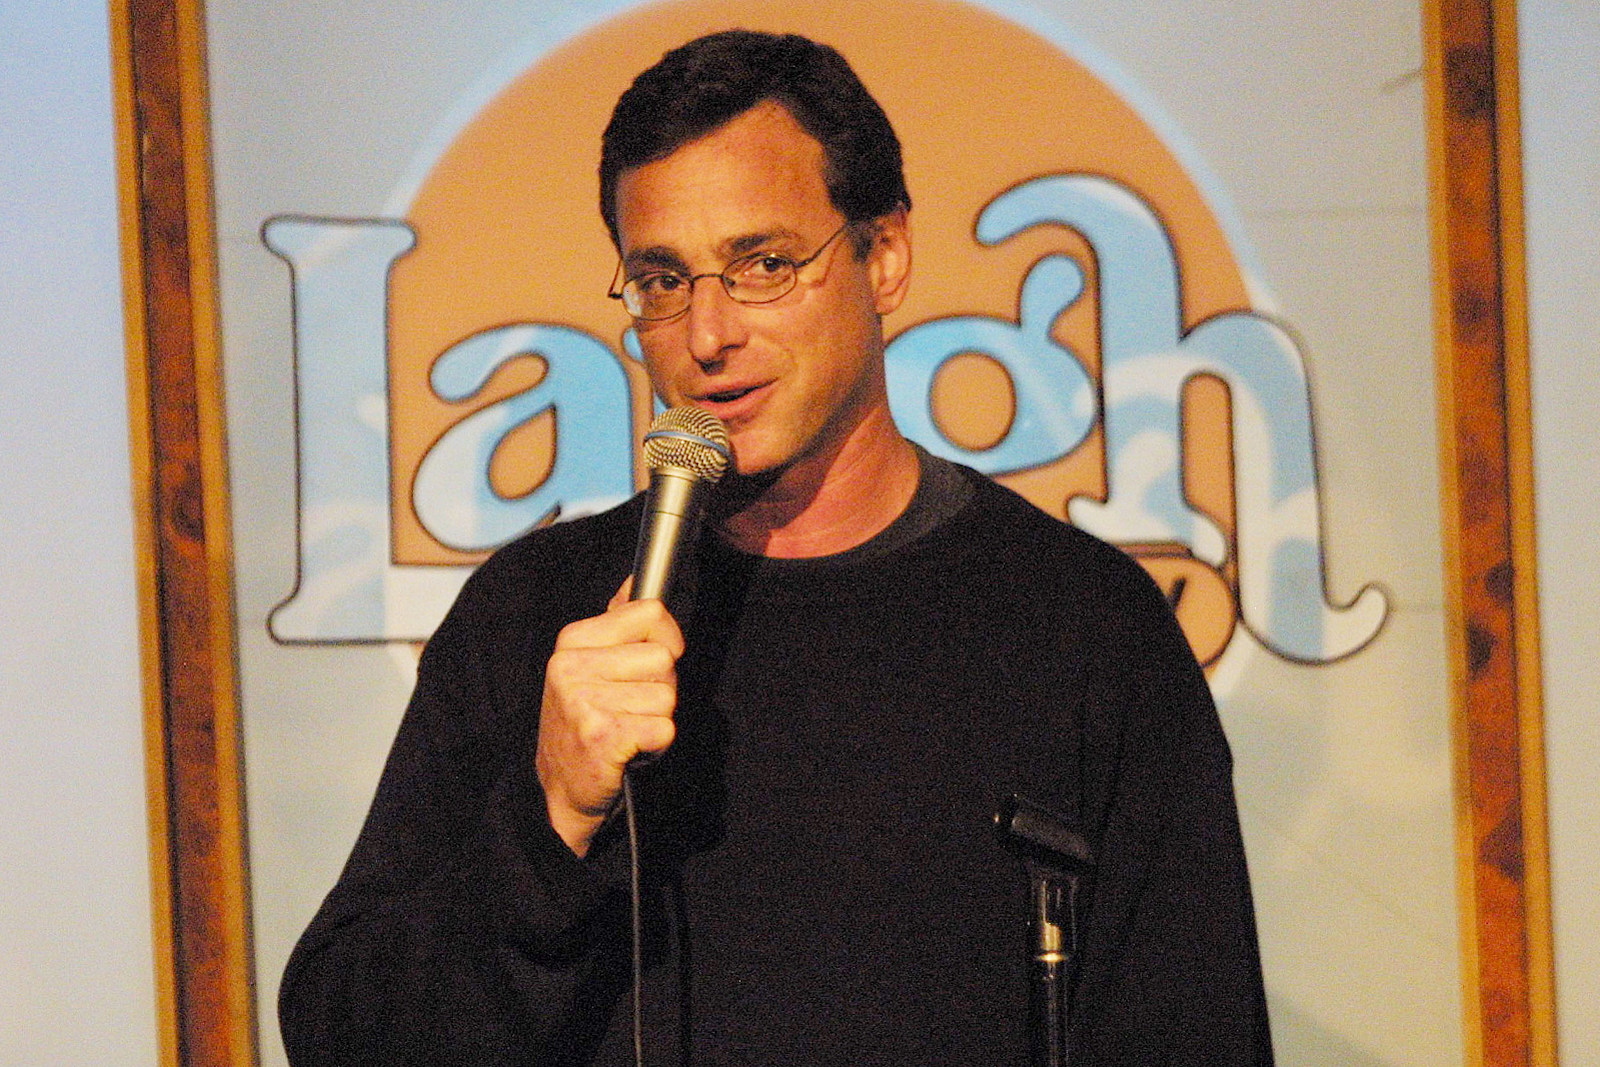 Bob Saget, Actor and Comedian Known for ‘Full House,’ Dead at 65